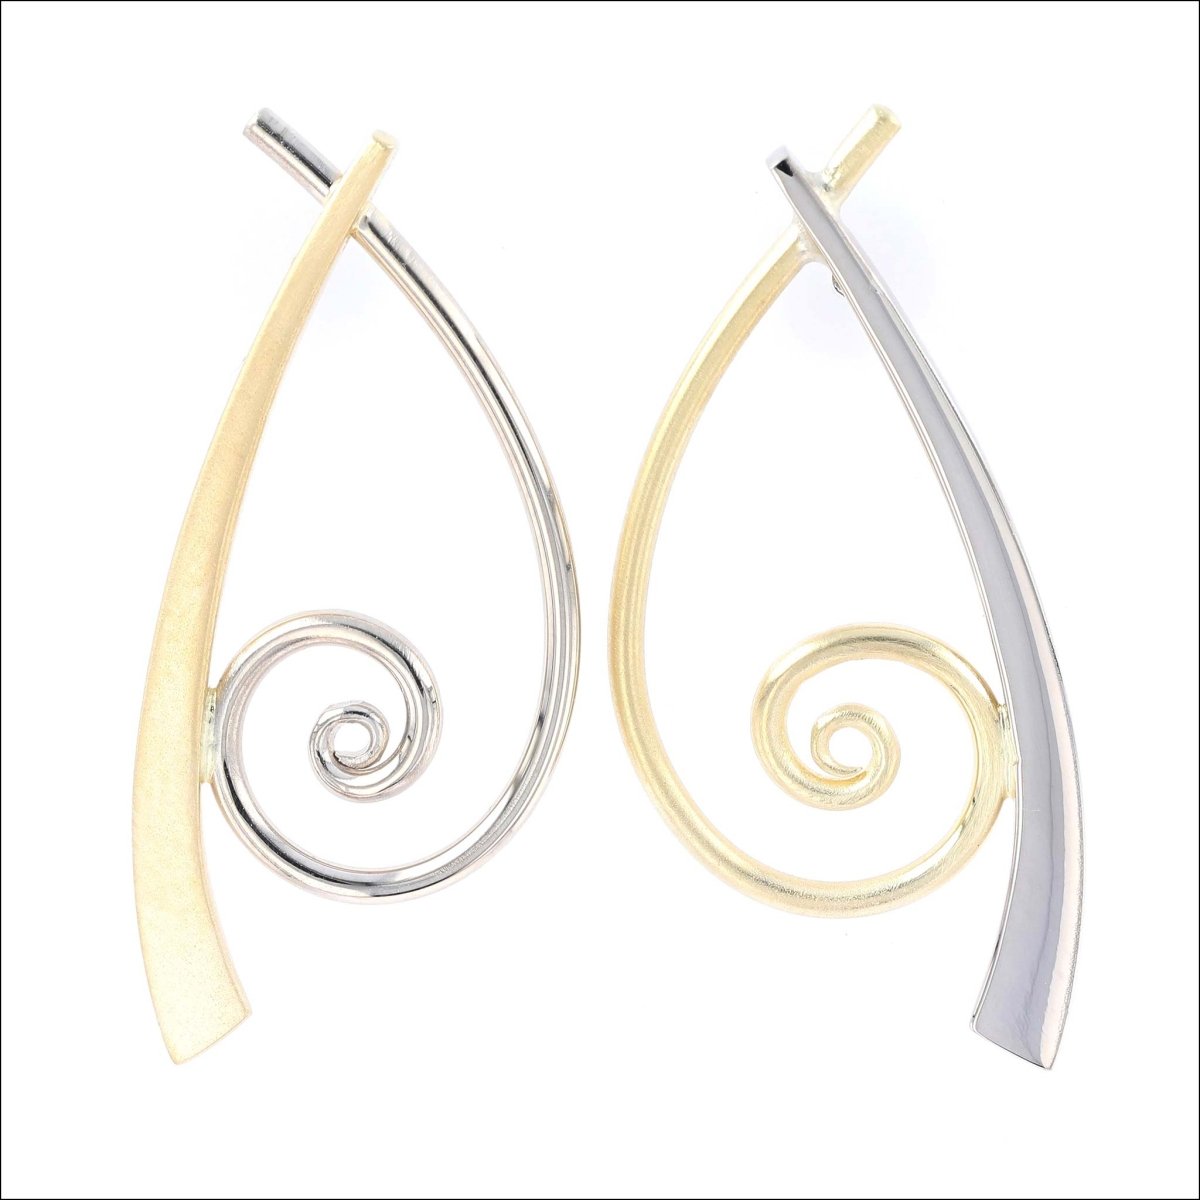 Two Tone Forged Spiral Earrings 14KW 18KY - JewelsmithEarrings